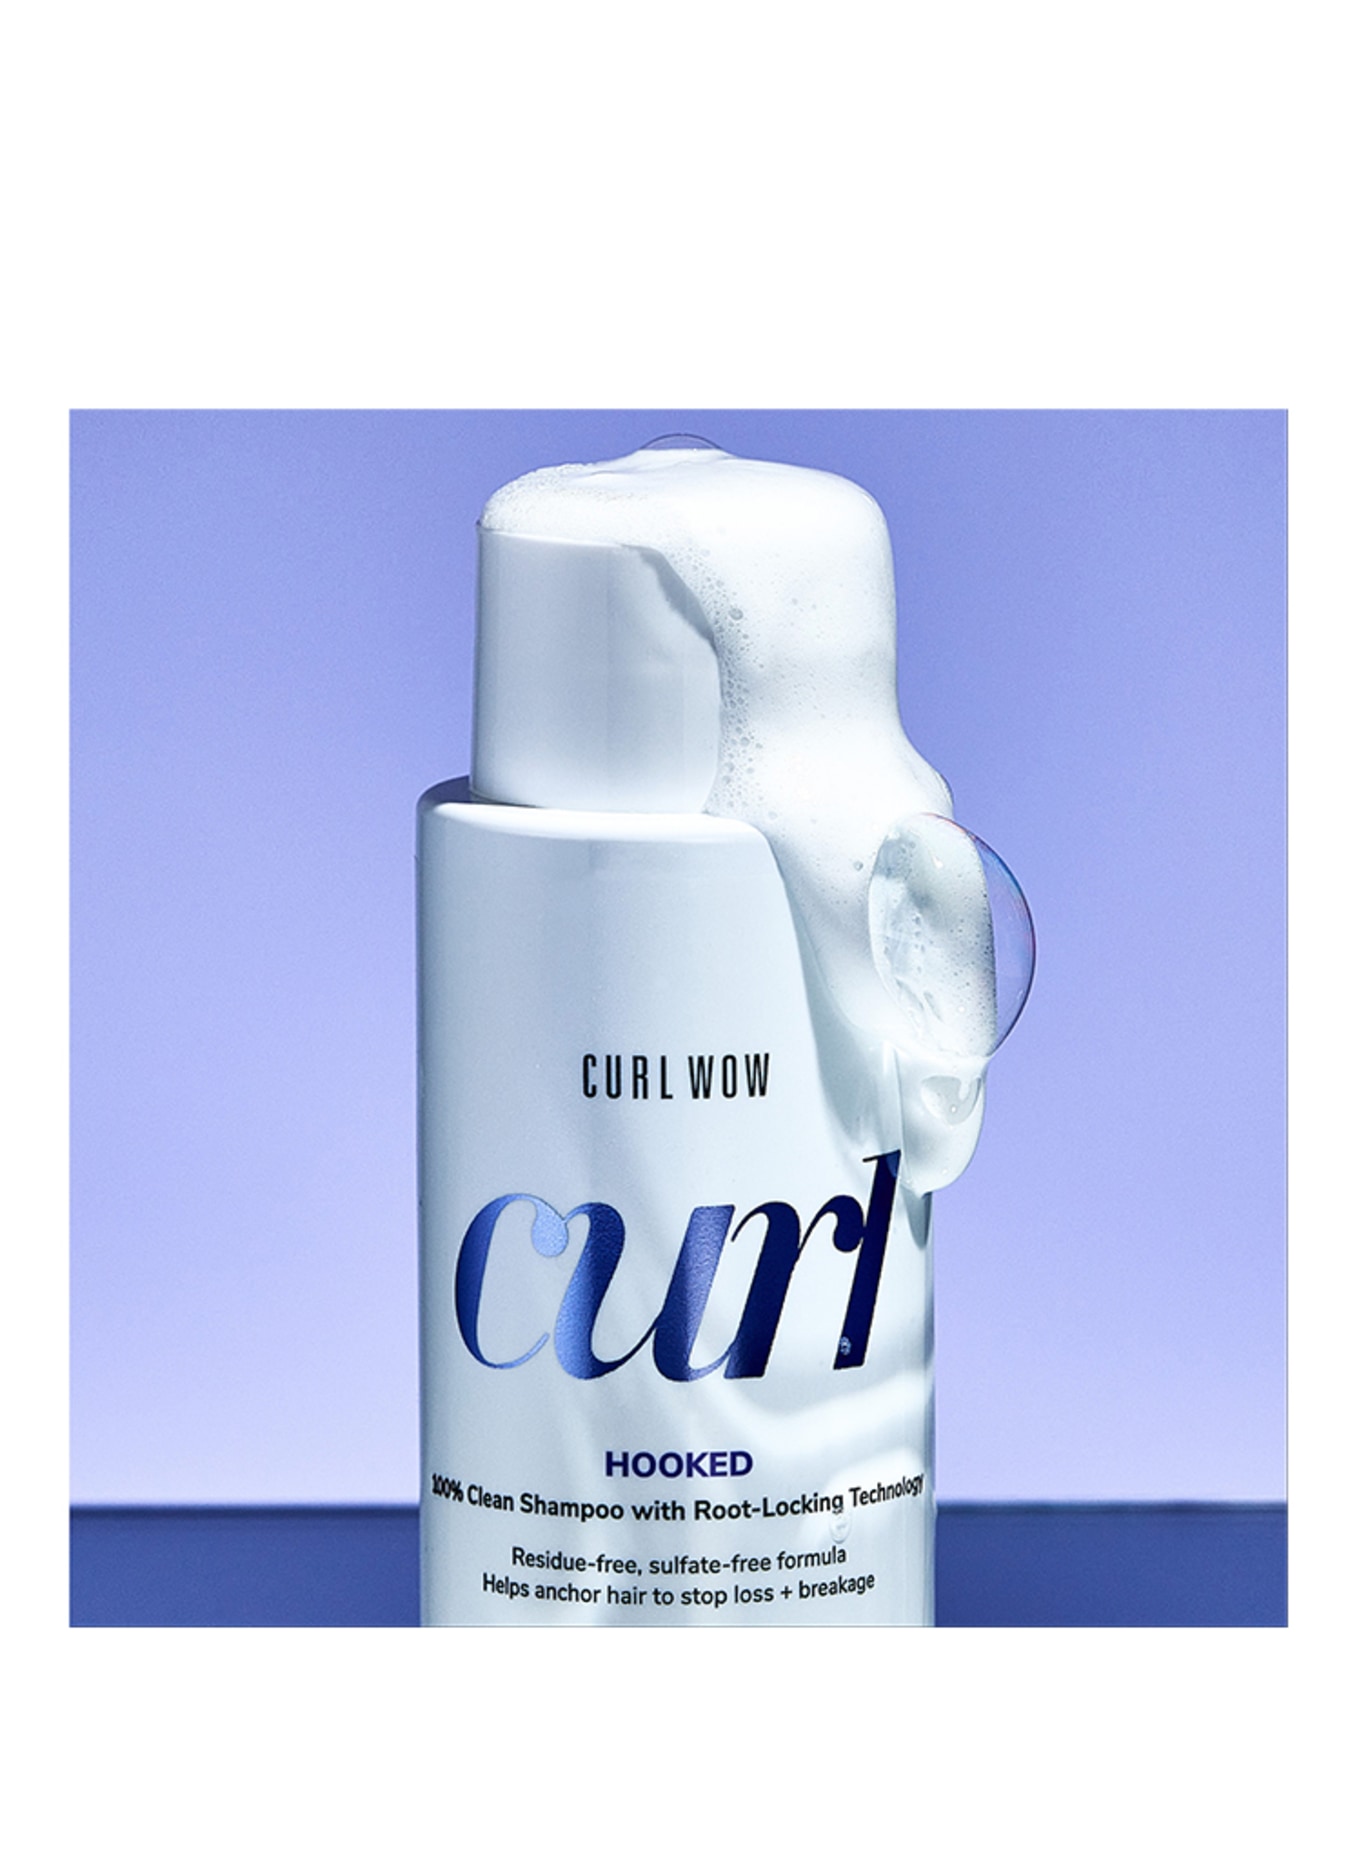 COLOR WOW CURL WOW HOOKED CLEAN SHAMPOO (Obrazek 2)